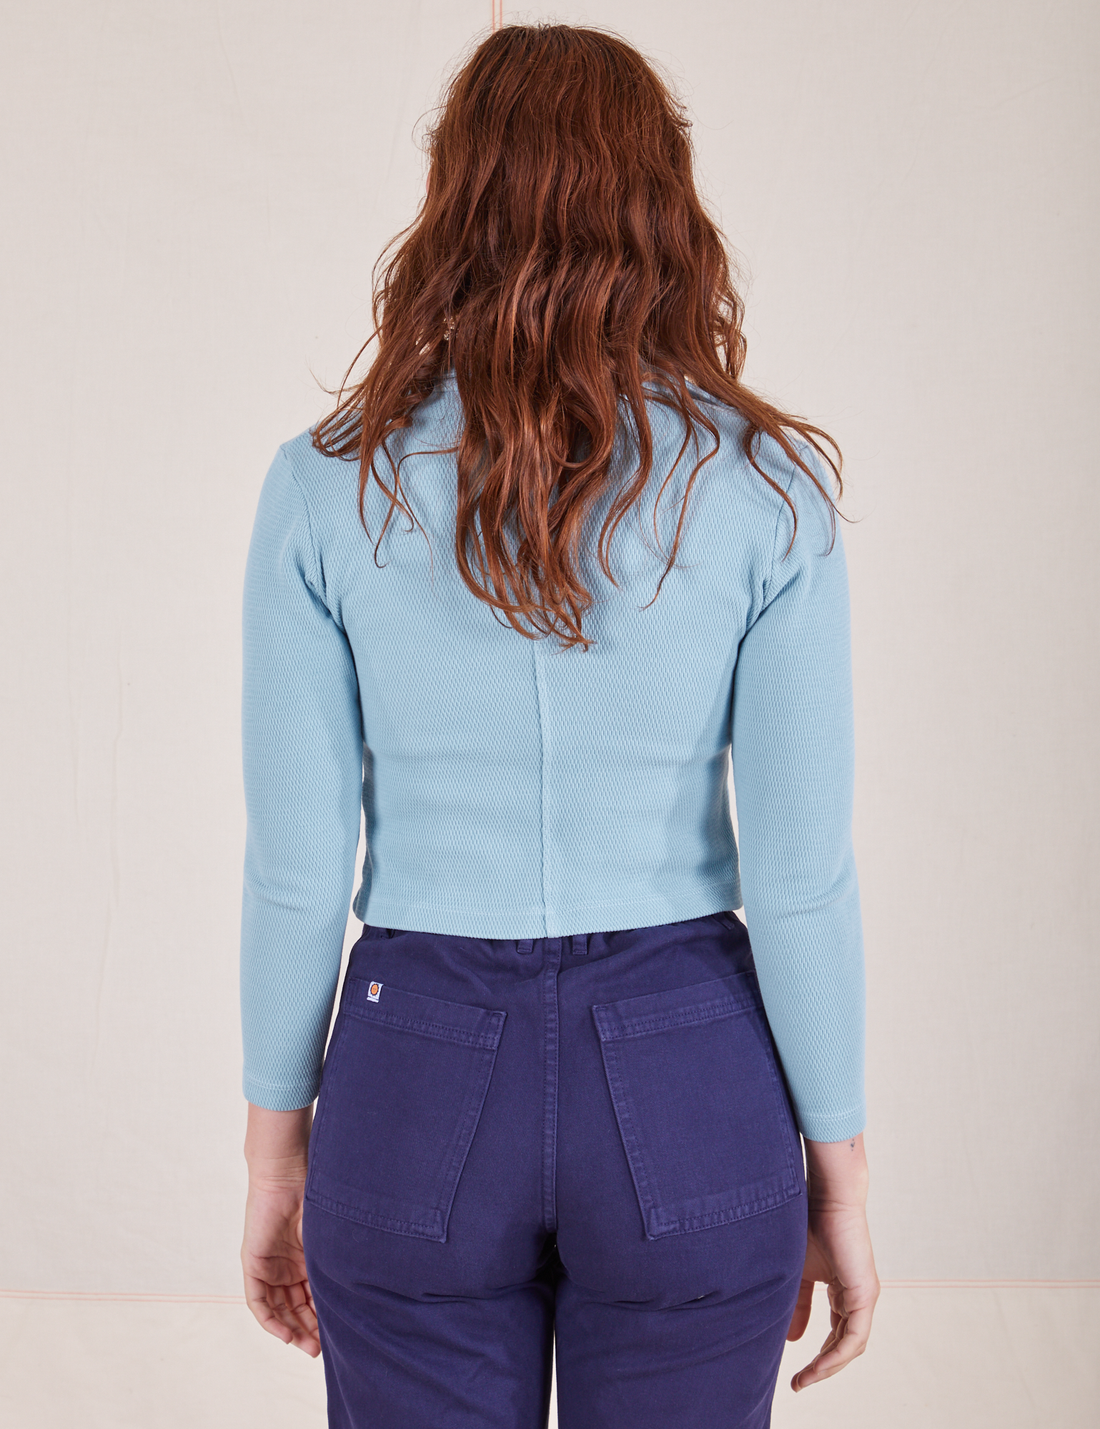 Long Sleeve Fisherman Polo in Baby Blue back view on Alex wearing navy blue Work Pants